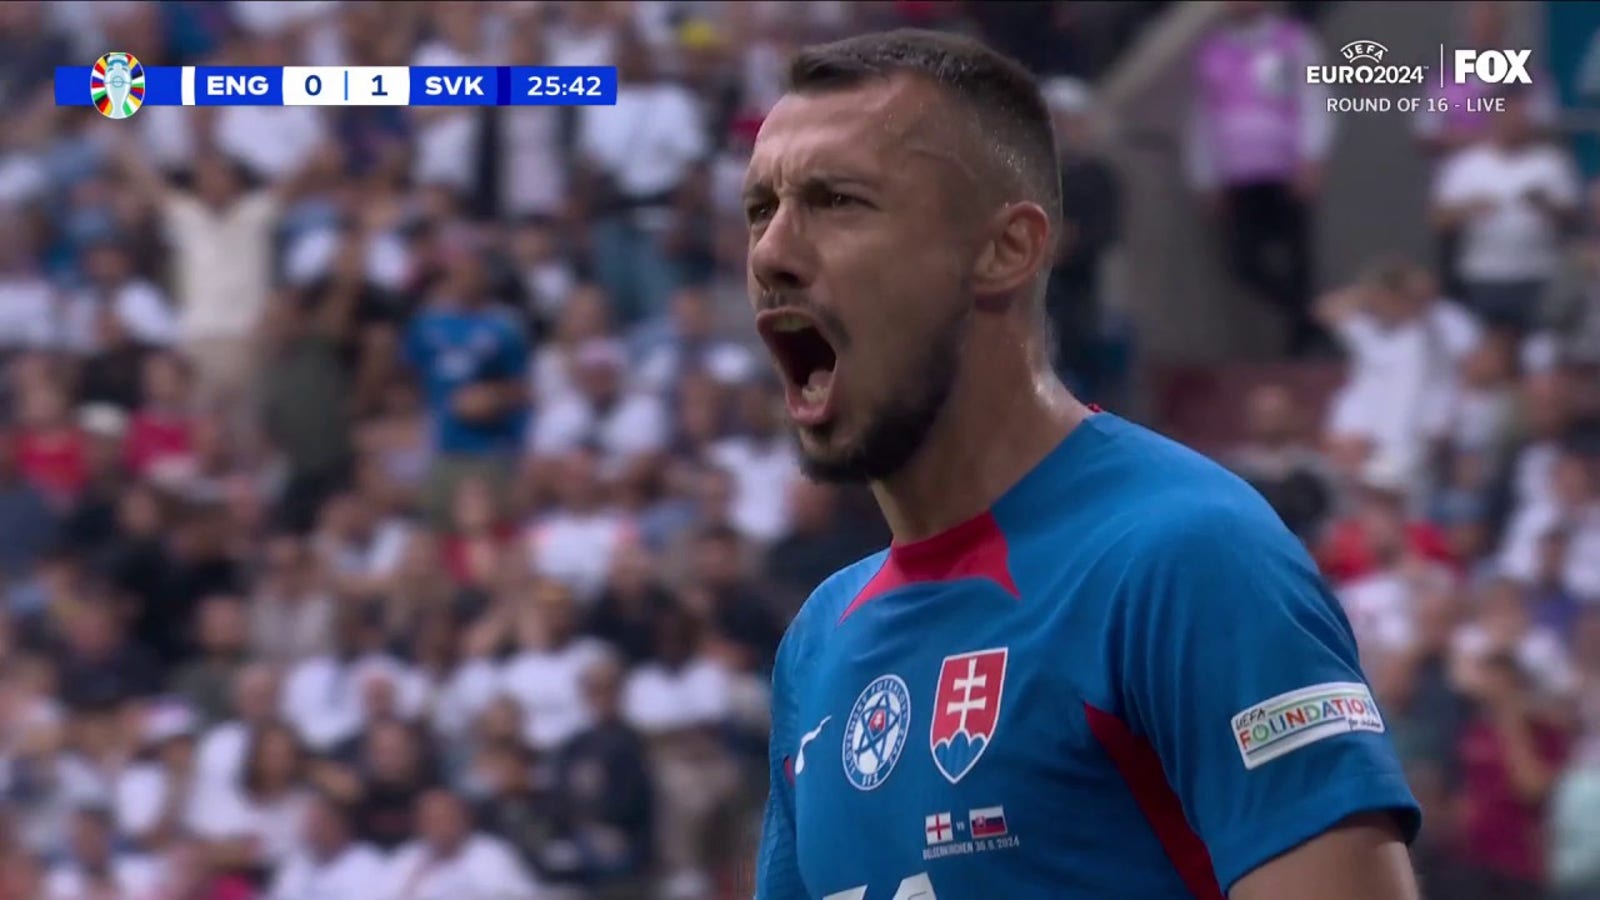 Slovakia takes a 1-0 lead over England after Ivan Schranz scores in 25' | UEFA Euro 2024 